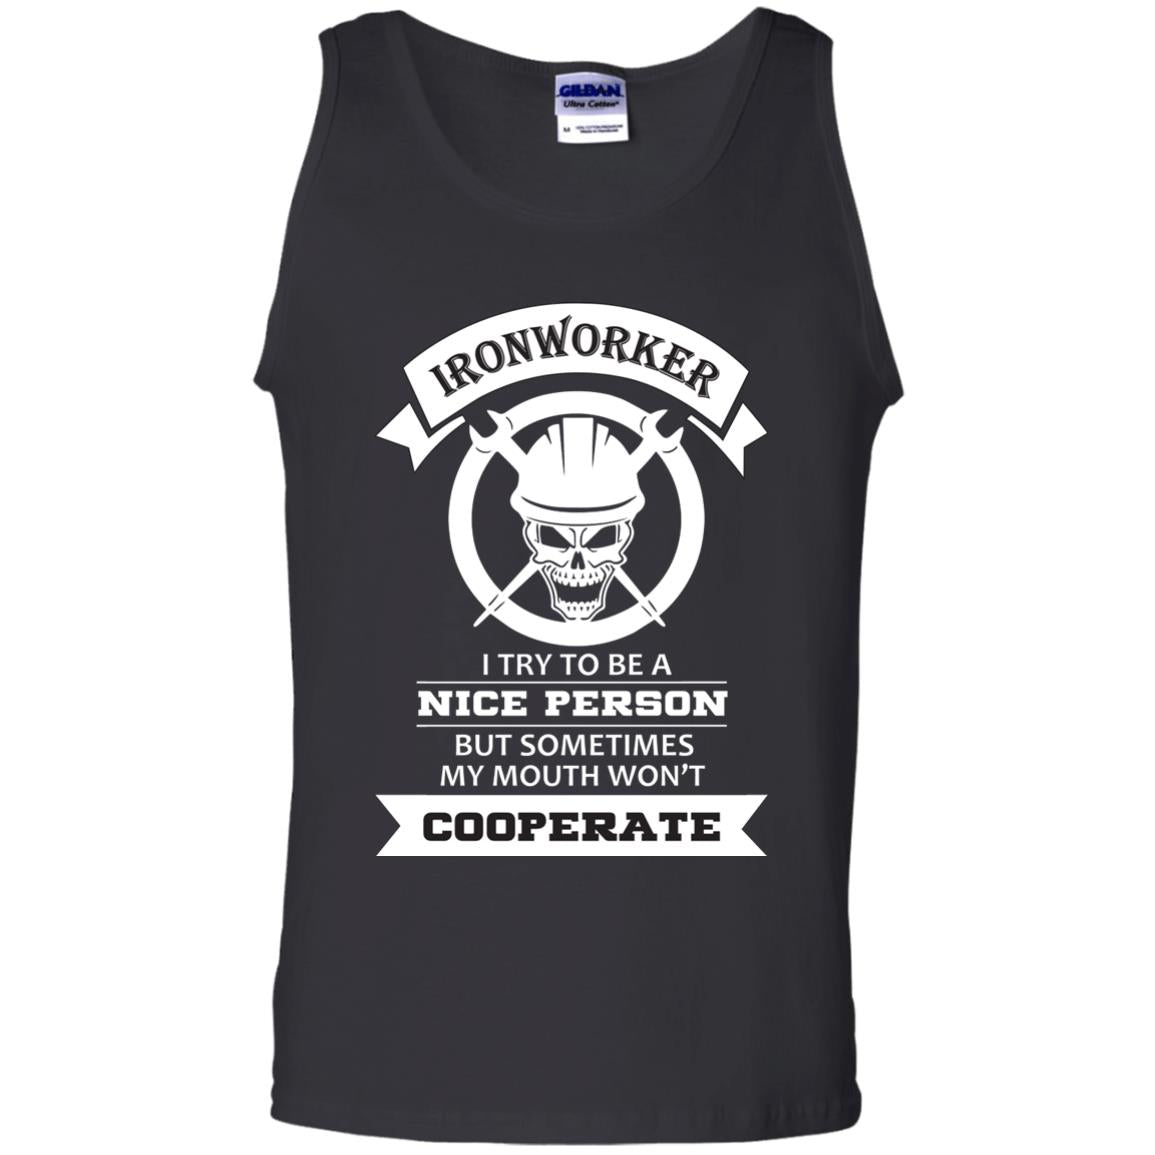 Ironworker I Try To Be A Nice Person But Sometimes My Mouth Won_t Cooperate ShirtG220 Gildan 100% Cotton Tank Top